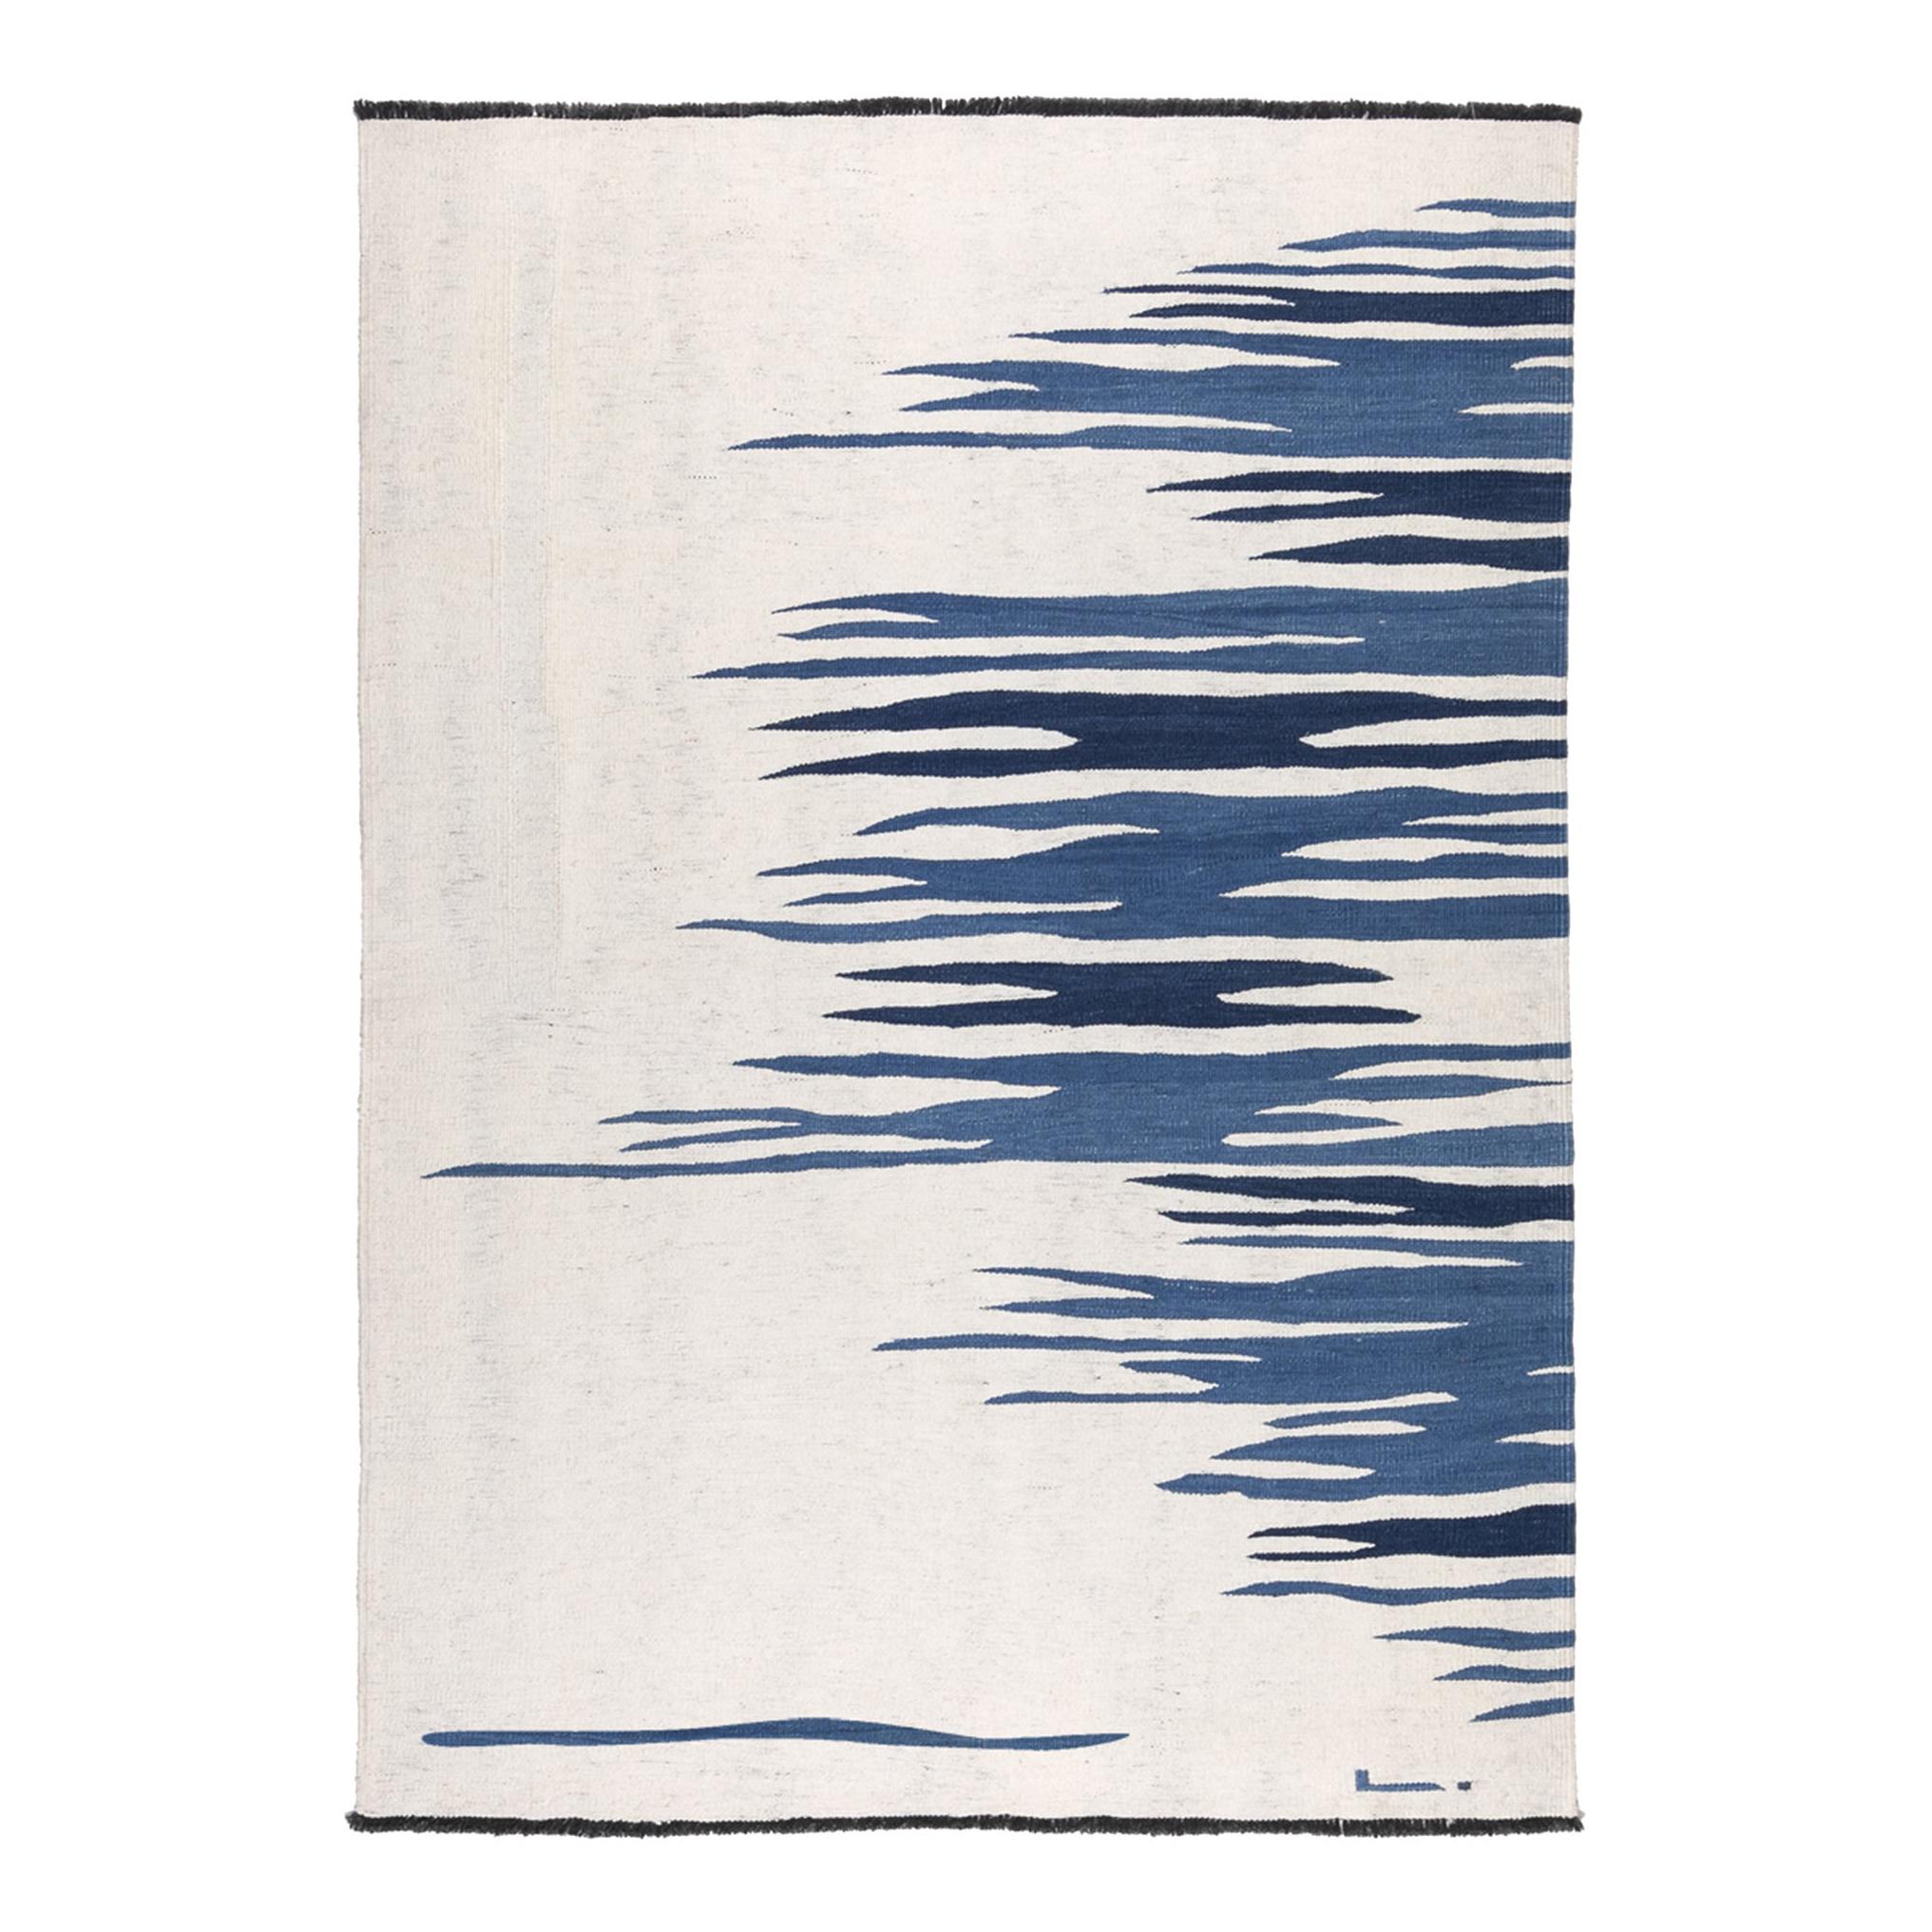 Ege No 2 Contemporary Modern Kilim Rug Wool Handwoven Dune White and Blue